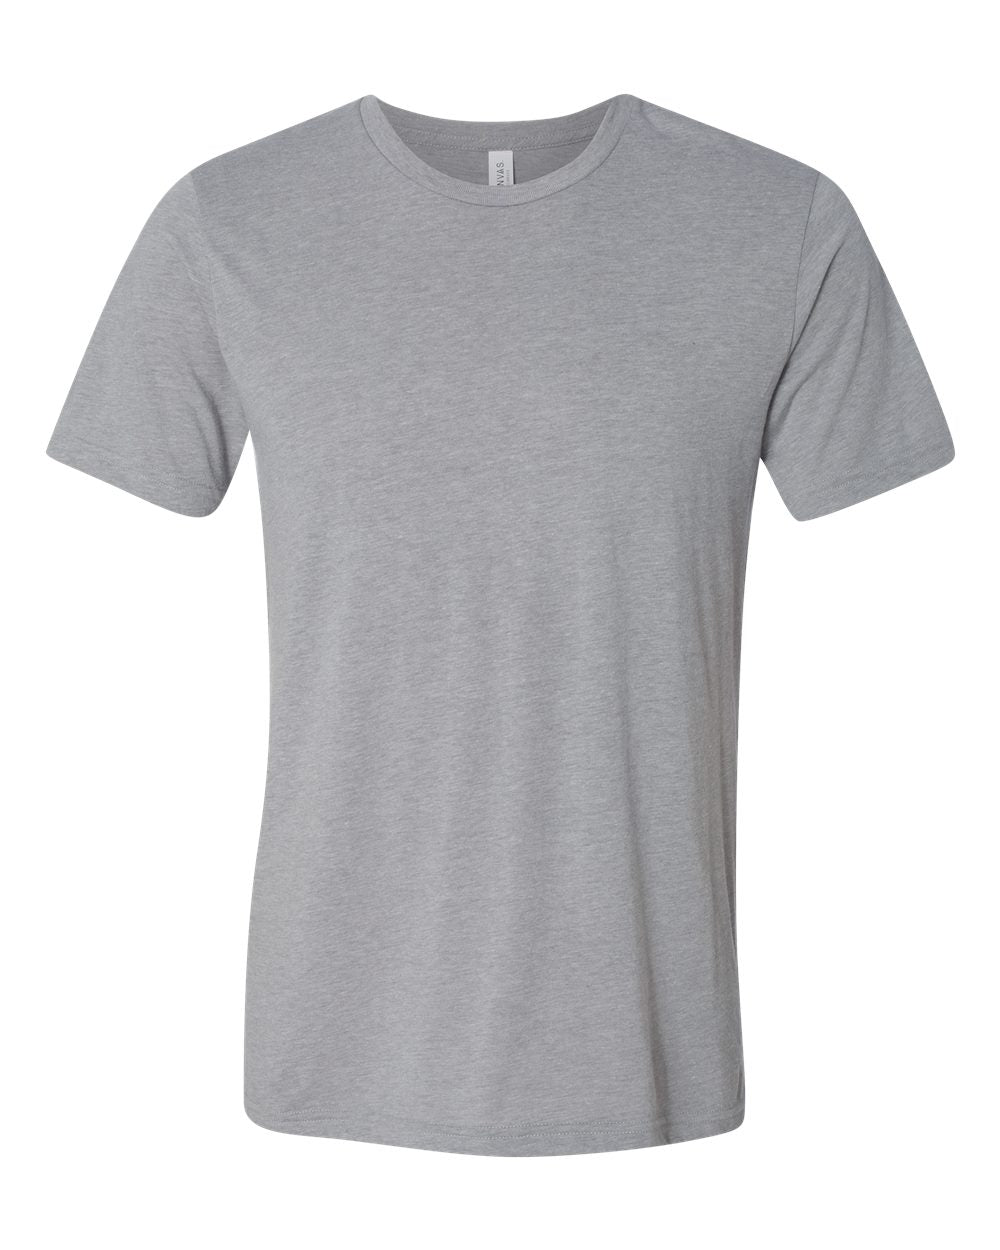 Bella + Canvas Triblend Tee (3413) in Athletic Grey Triblend